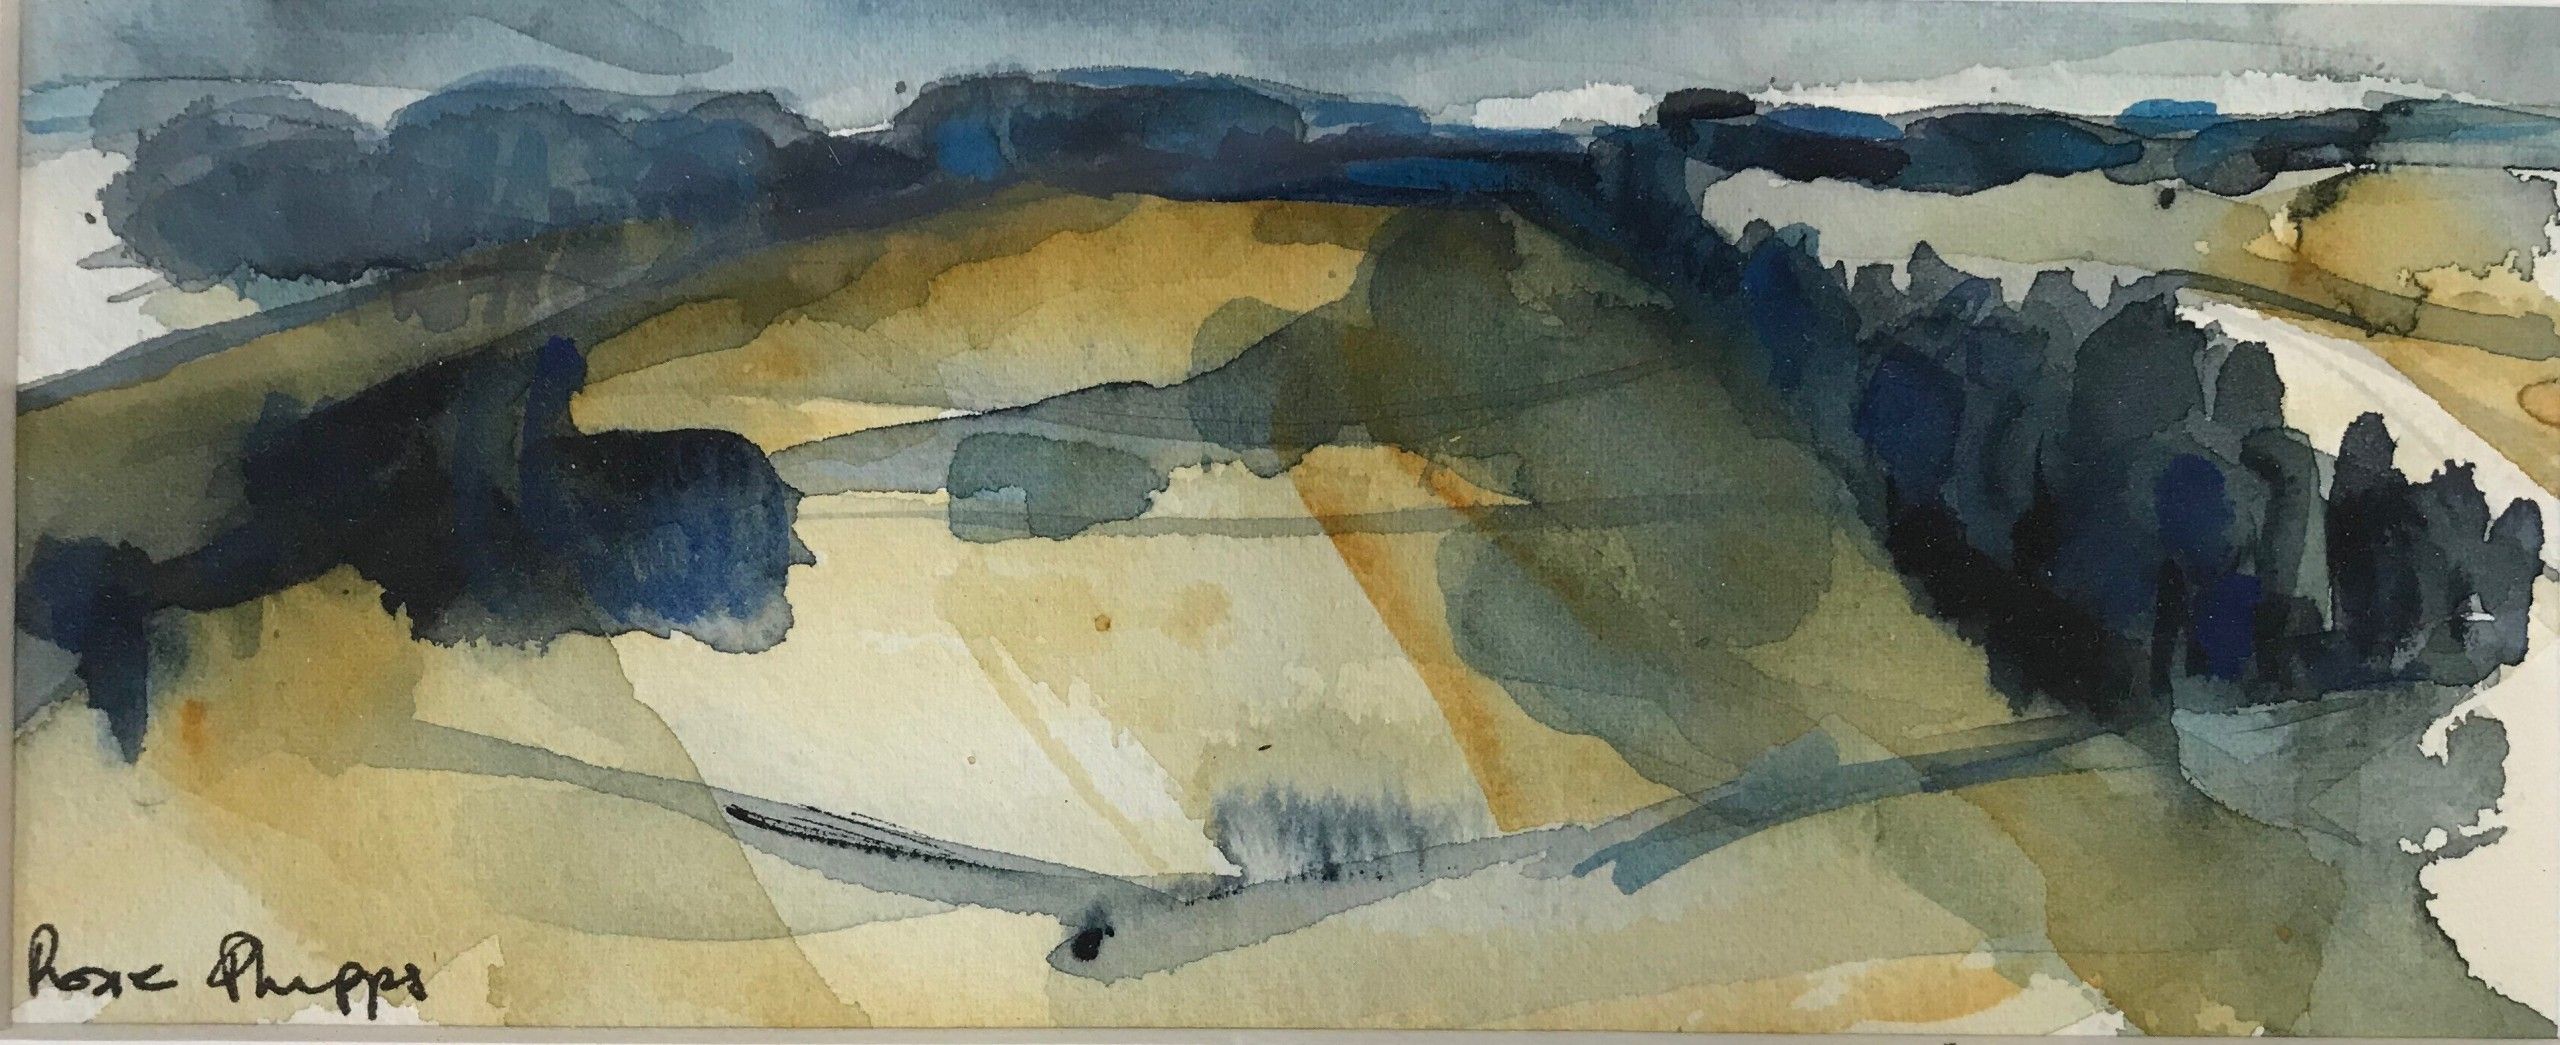 Cotswolds Landscape by Rosie Phipps